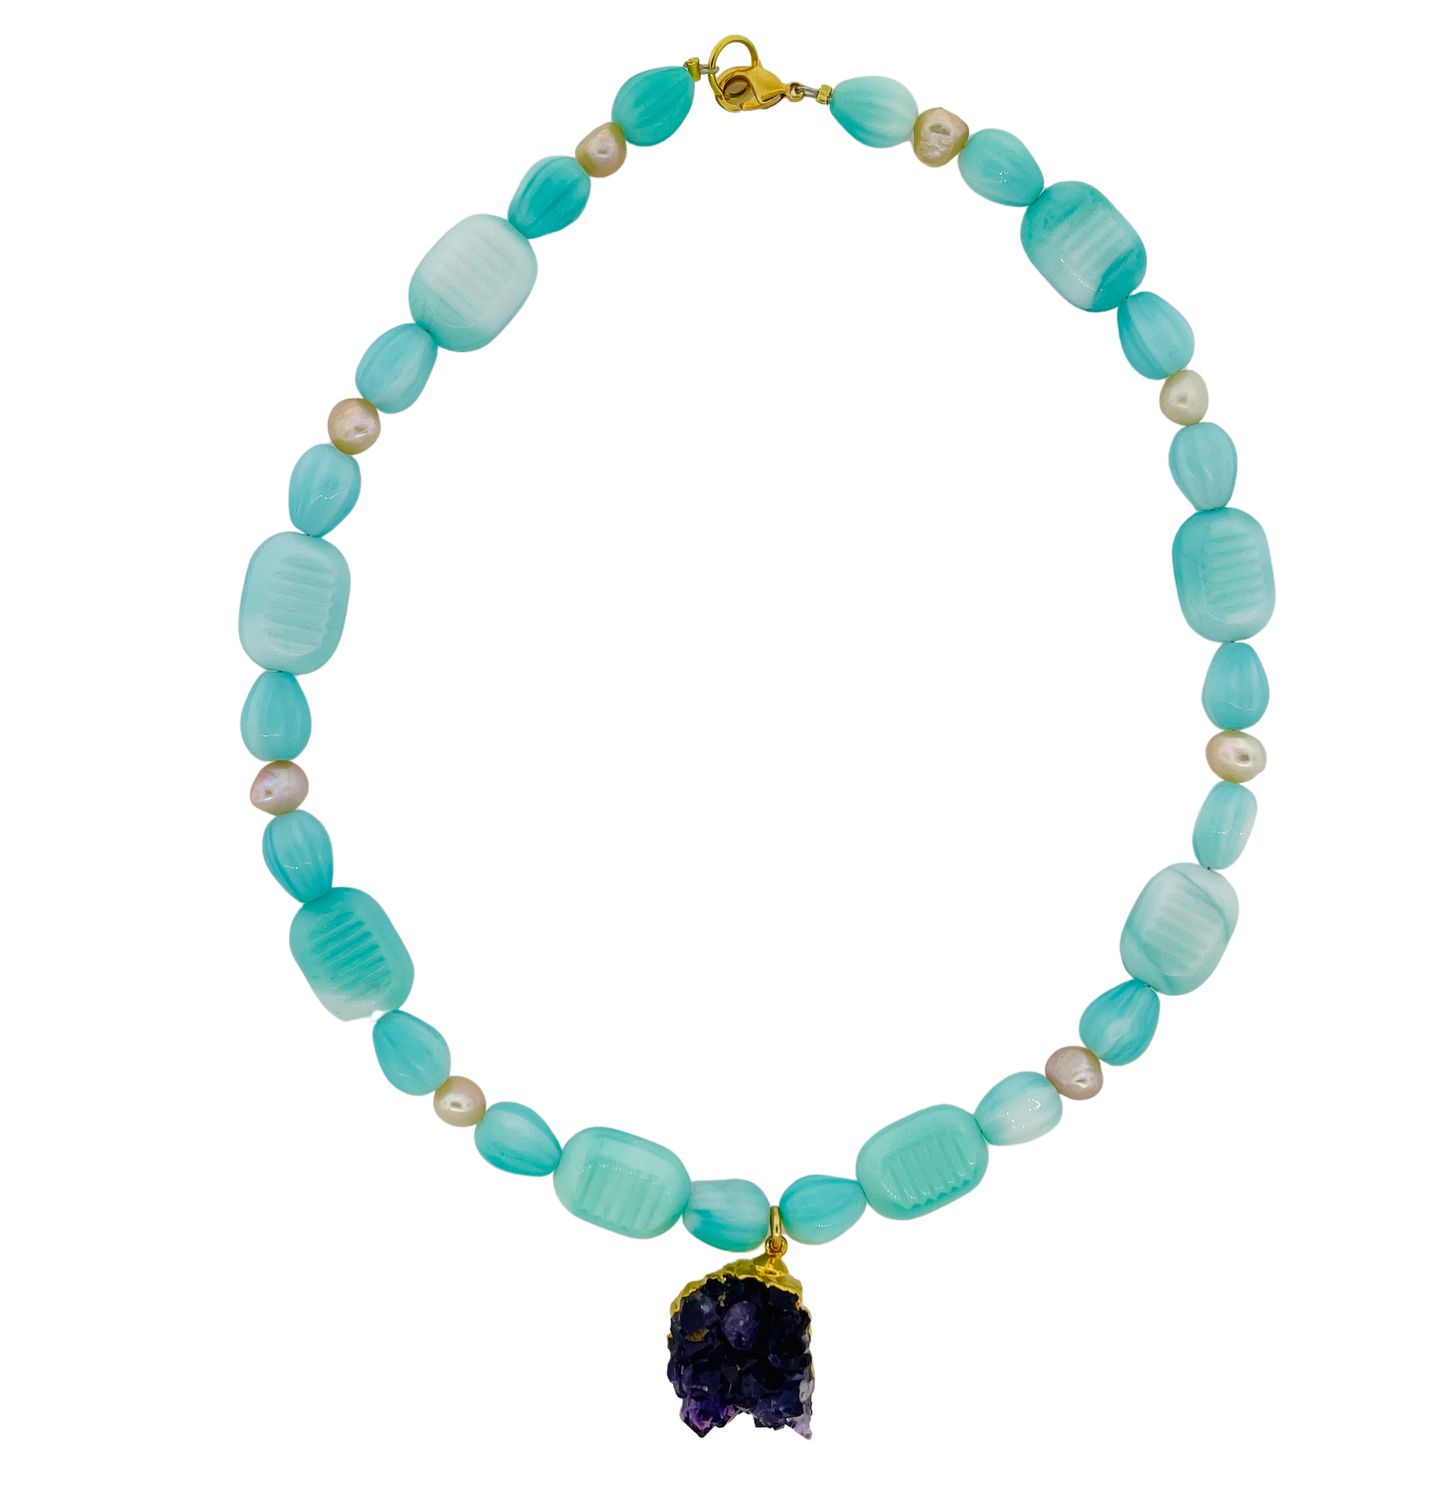 Vintage Seafoam Green Glass and Pearl Necklace with Amethyst